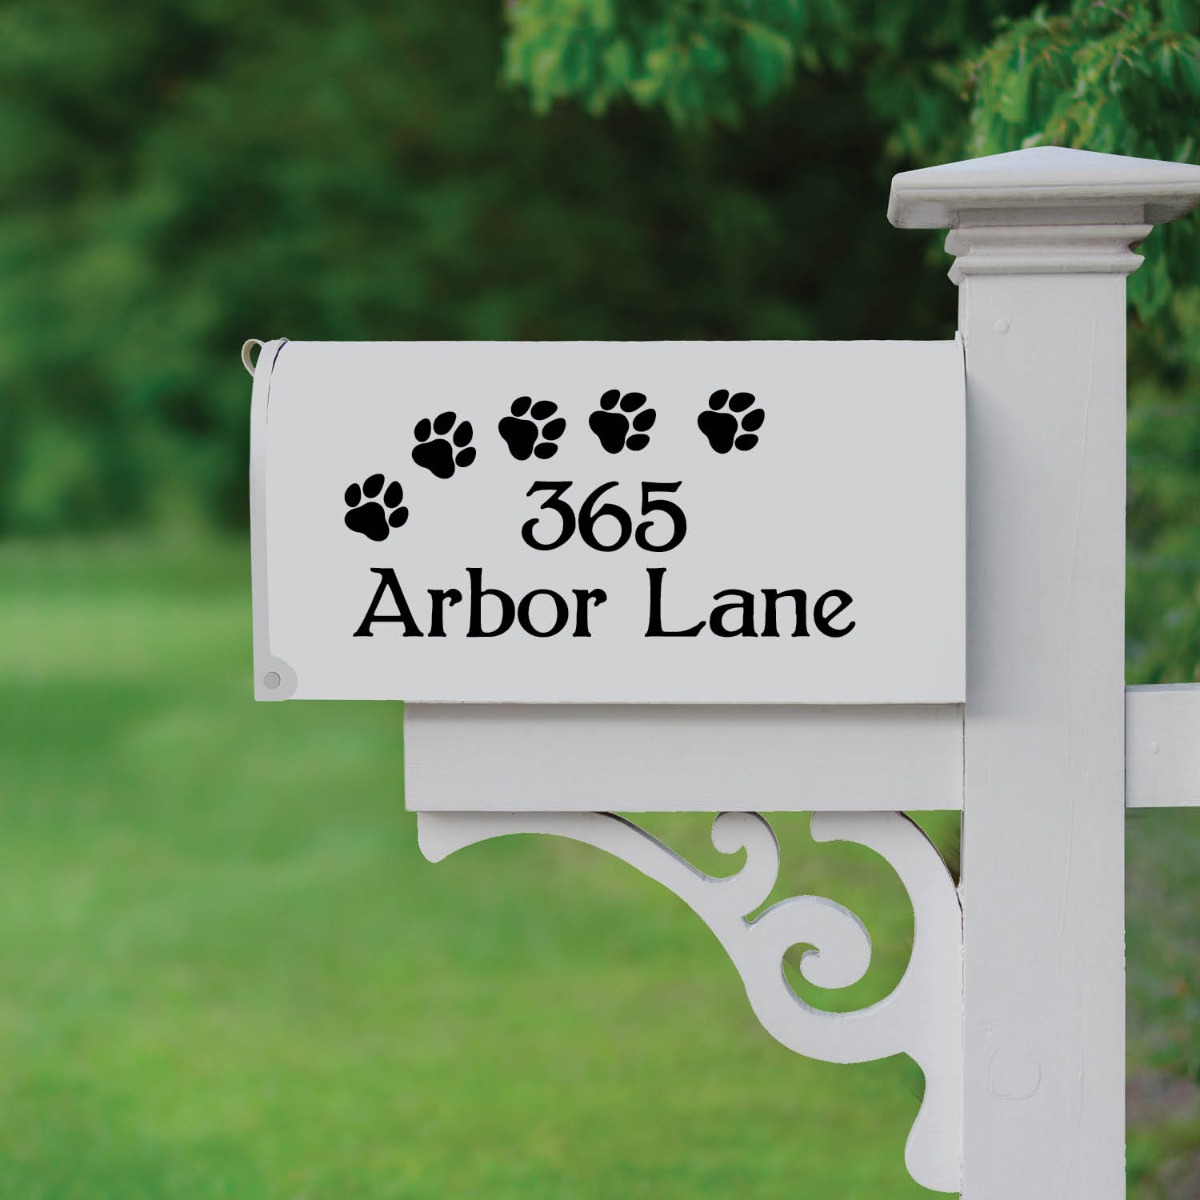 Paw Prints Personalized Black Mailbox Decal